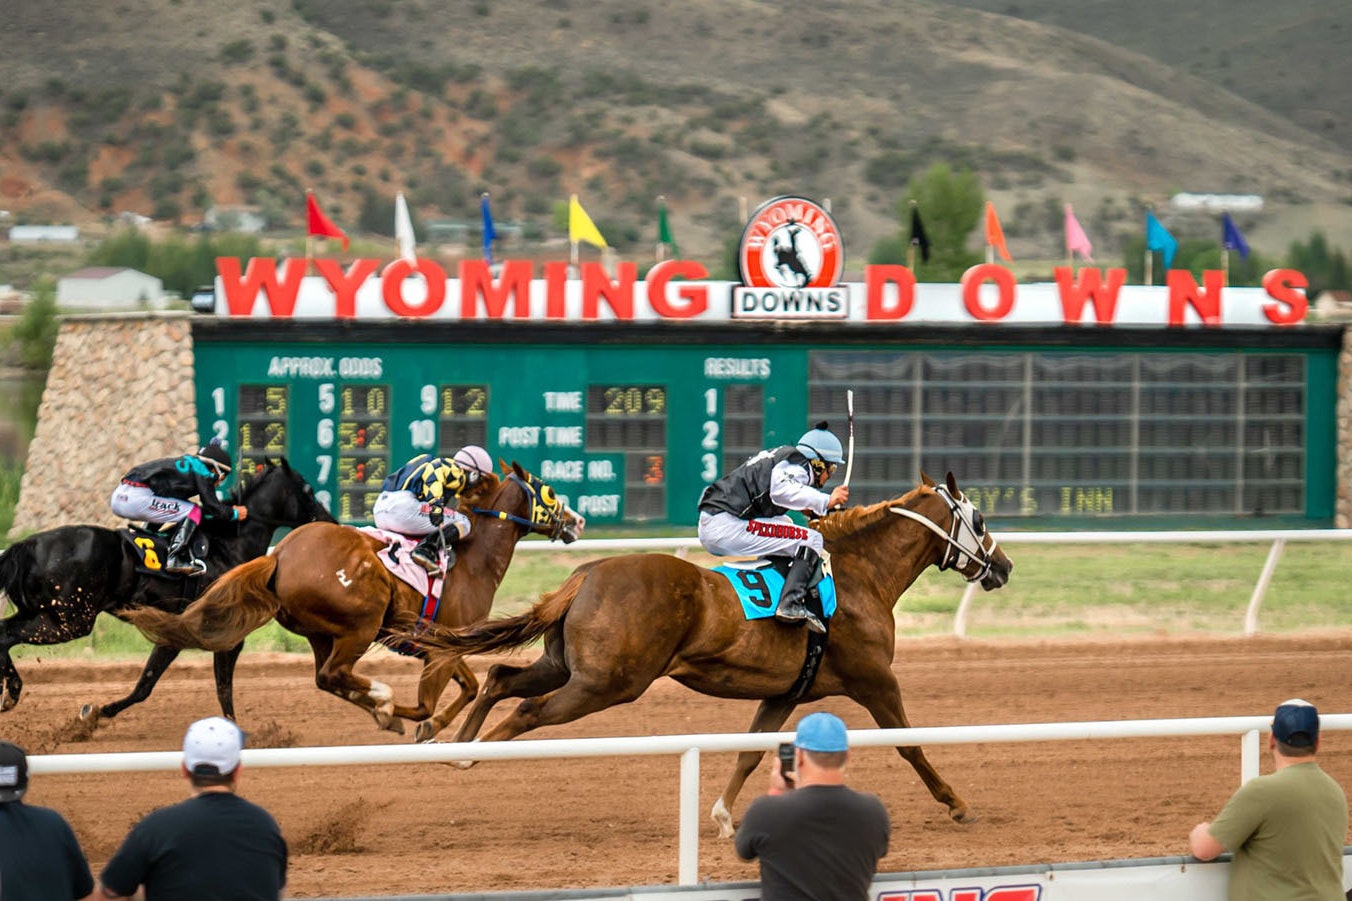 Horses race at the Wyoming Downs racetrack in Evanston, Wyoming.